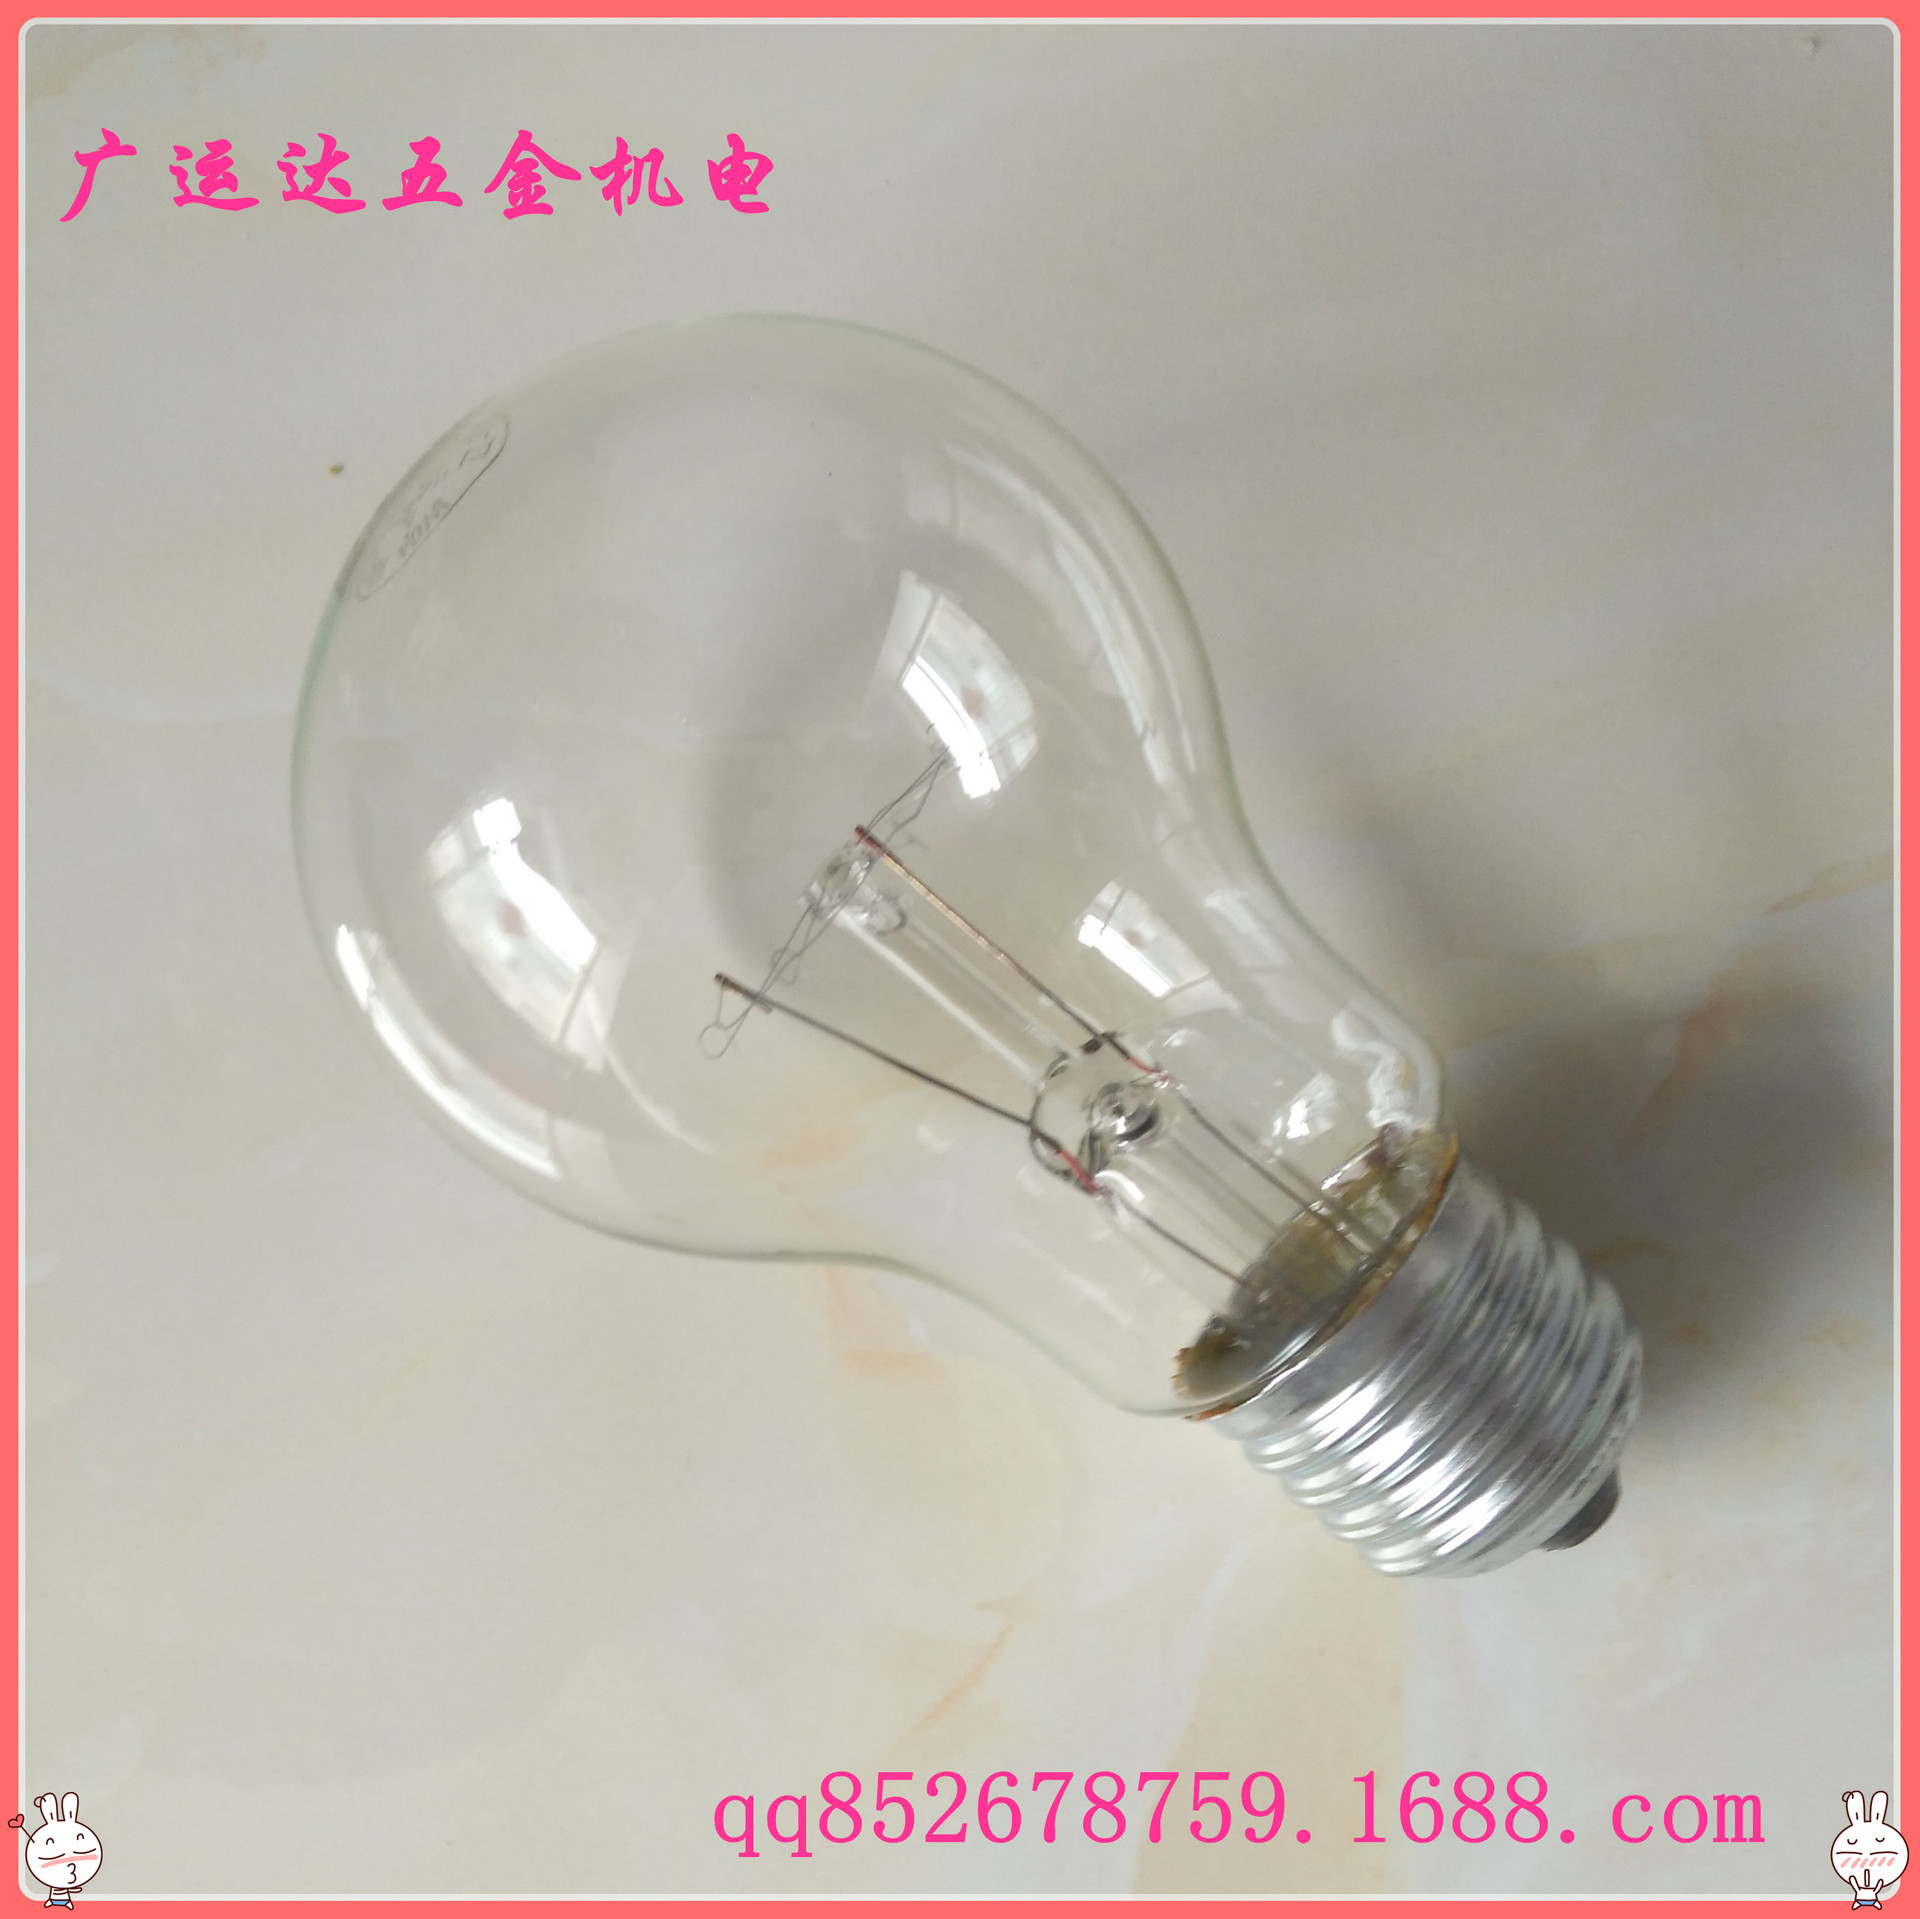 old-fashioned Incandescent light bulbs E27 ordinary high quality engineering Property 220V Screw 10W energy conservation lighting Incandescent bulbs